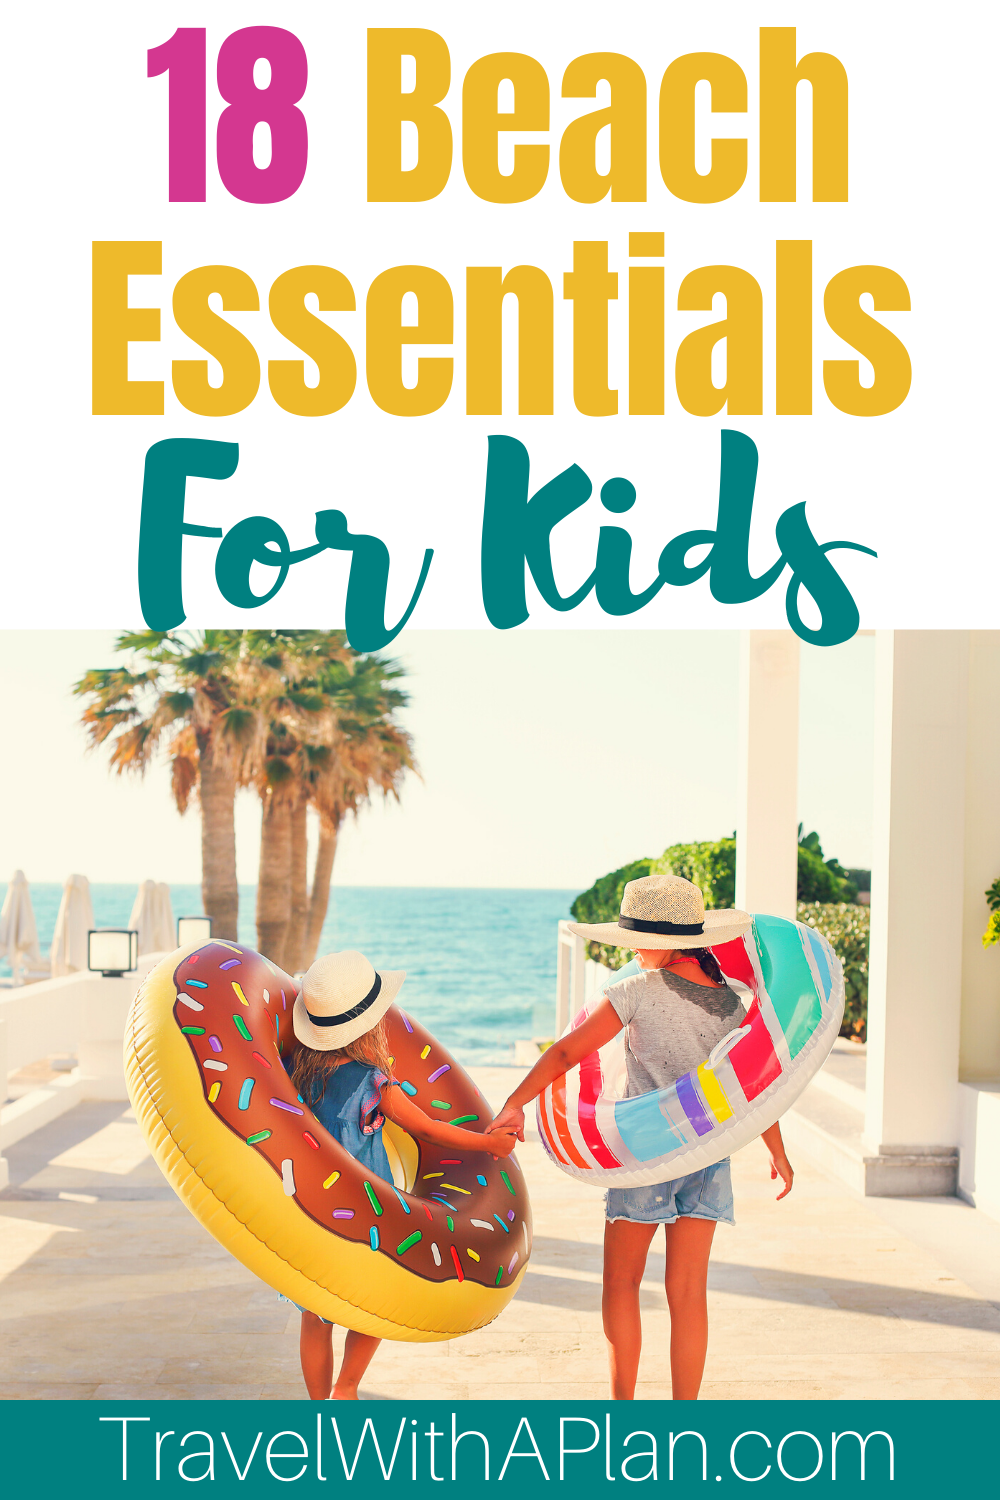 These 18 things to bring to the beach are absolute essentials for a trip to the beach or pool!  We never travel to the beach without a beach bag complete with the following items!  Get all of our secrets here!  #thingstobringtothebeach #beachbagessentials #thingstobringtothebeachforkids #familybeachbagessentials #whattopackforthebeach #familybeachvacation